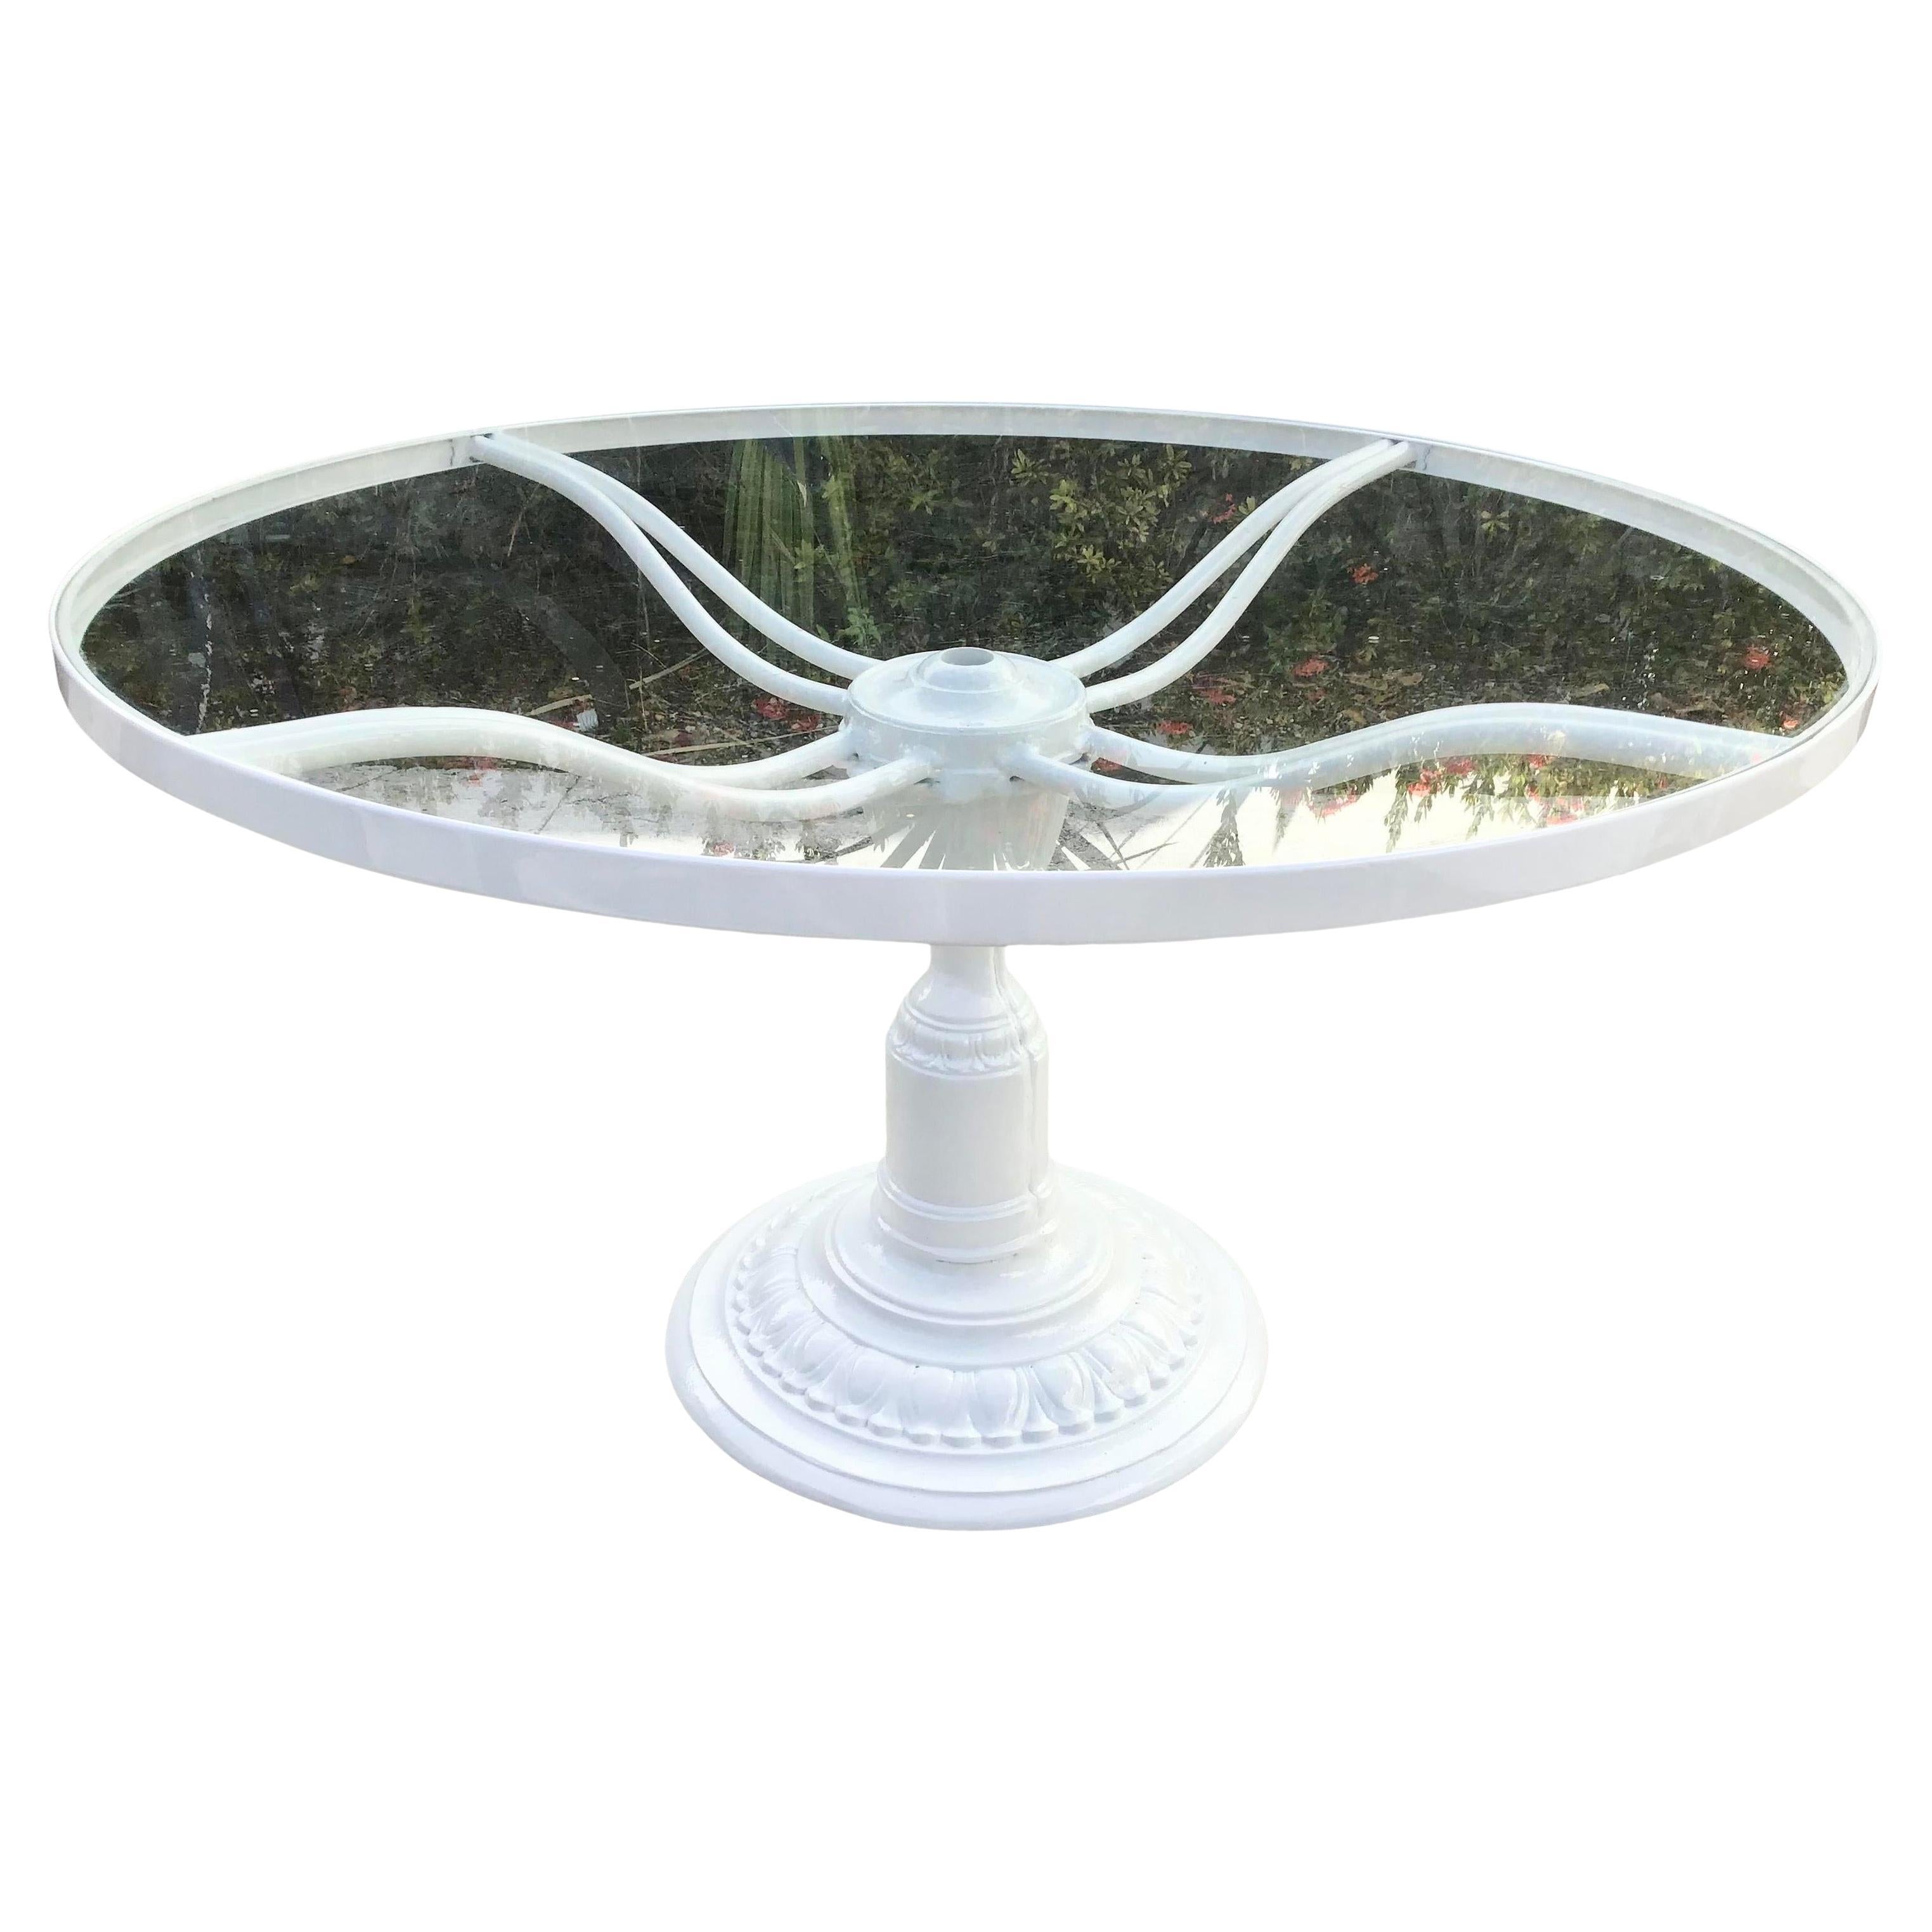 Large Neoclassical Patio Round Dining Table With Glass Surface